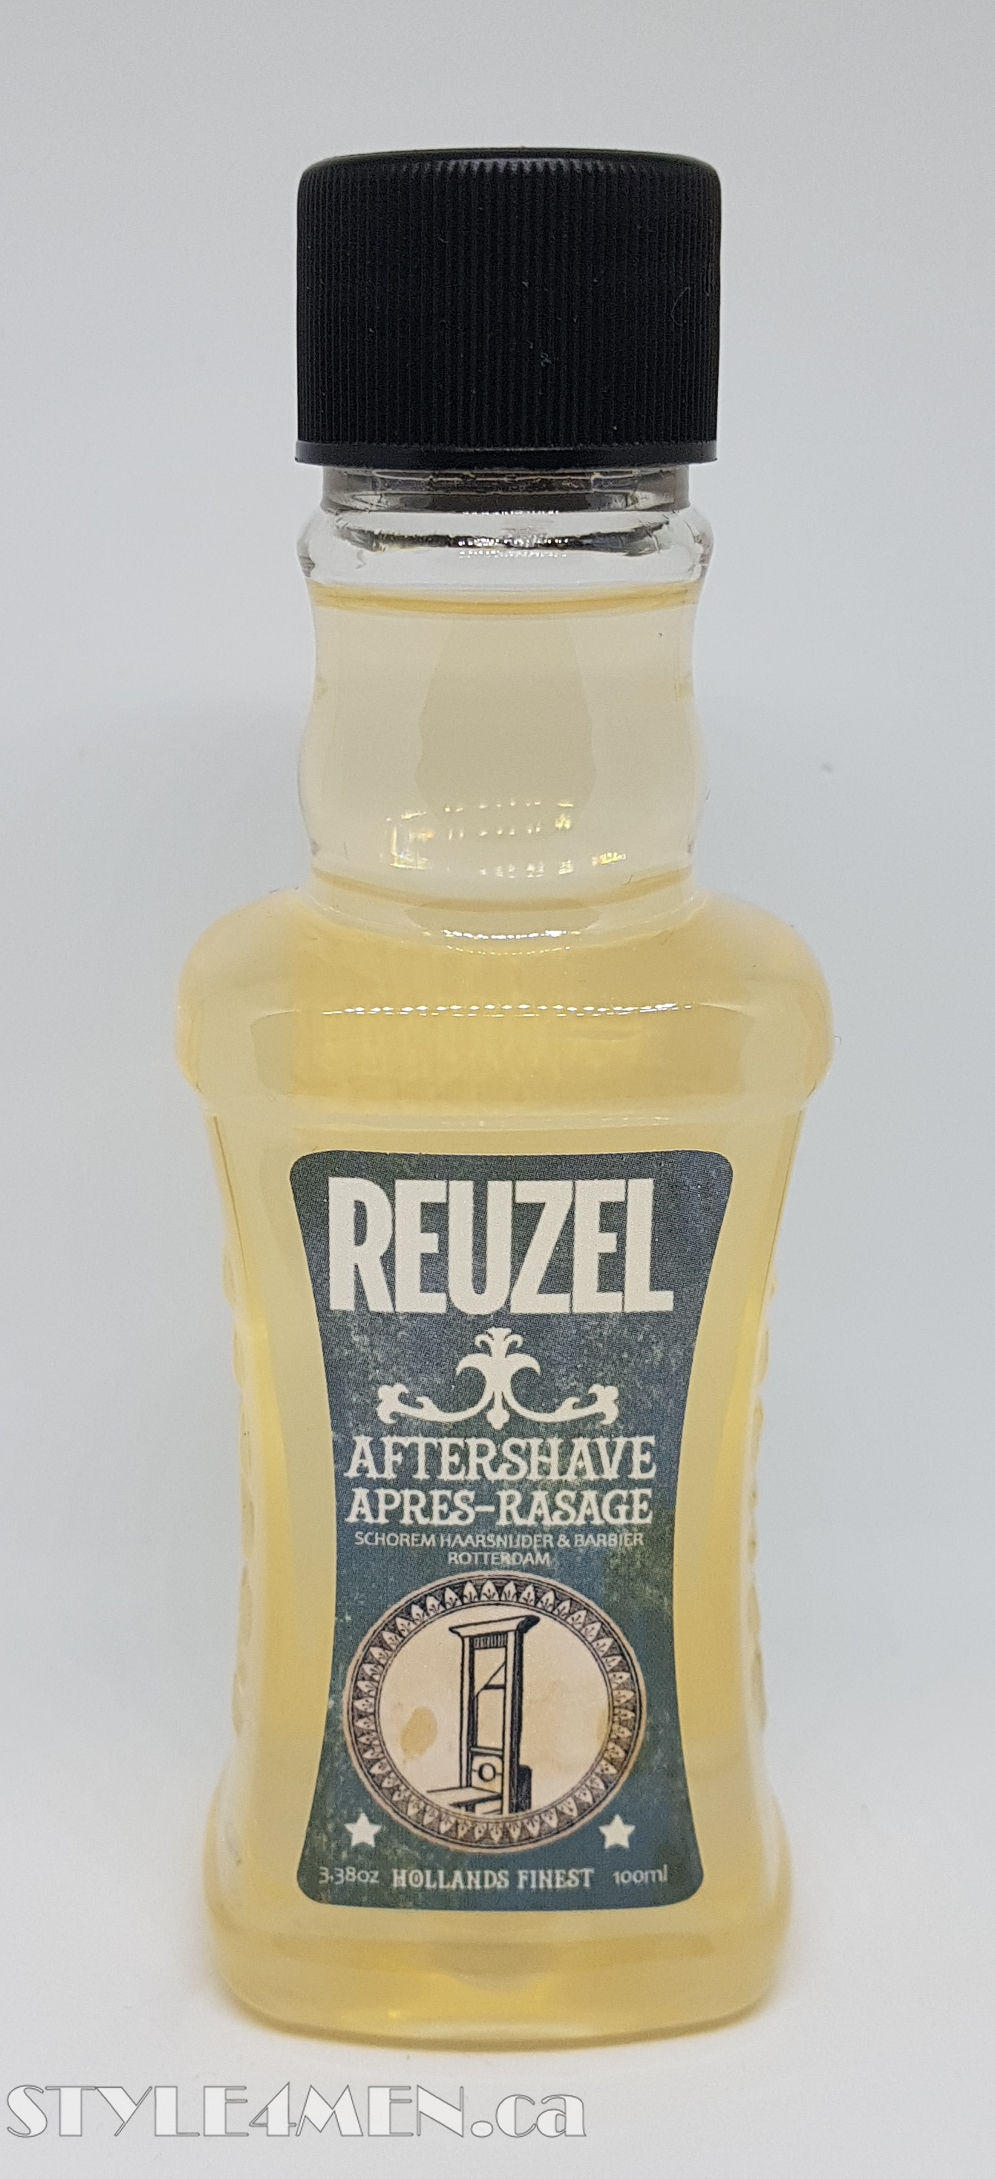 REUZEL Aftershave – A new take on a classic